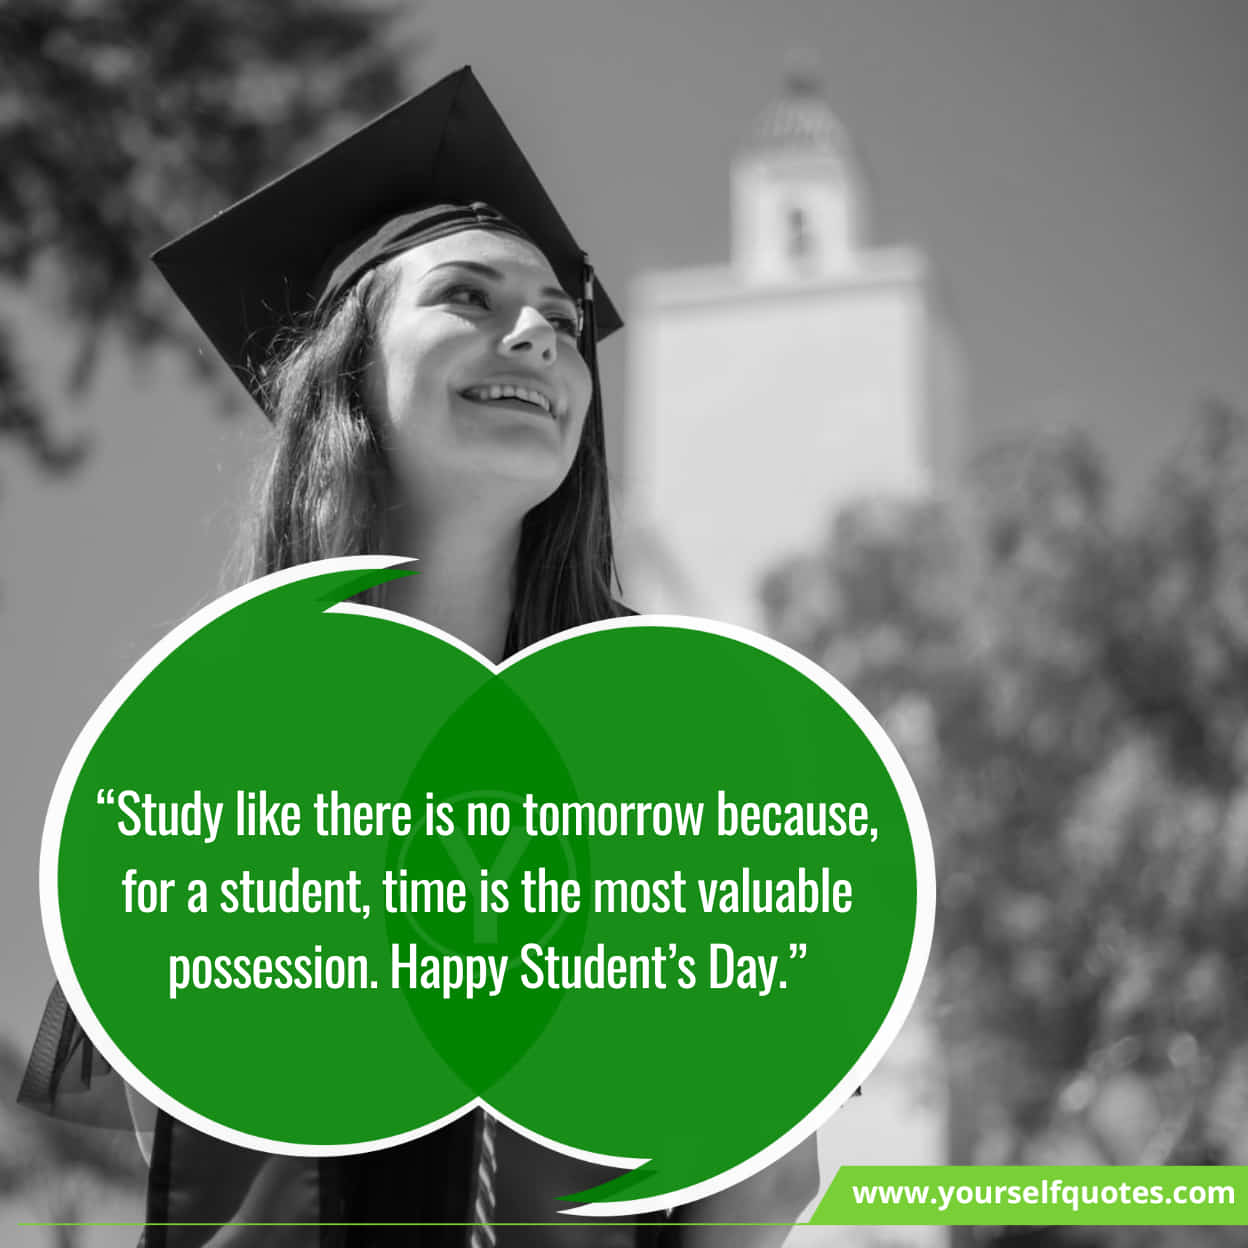 Best Famous Quotes For Happy Students Day